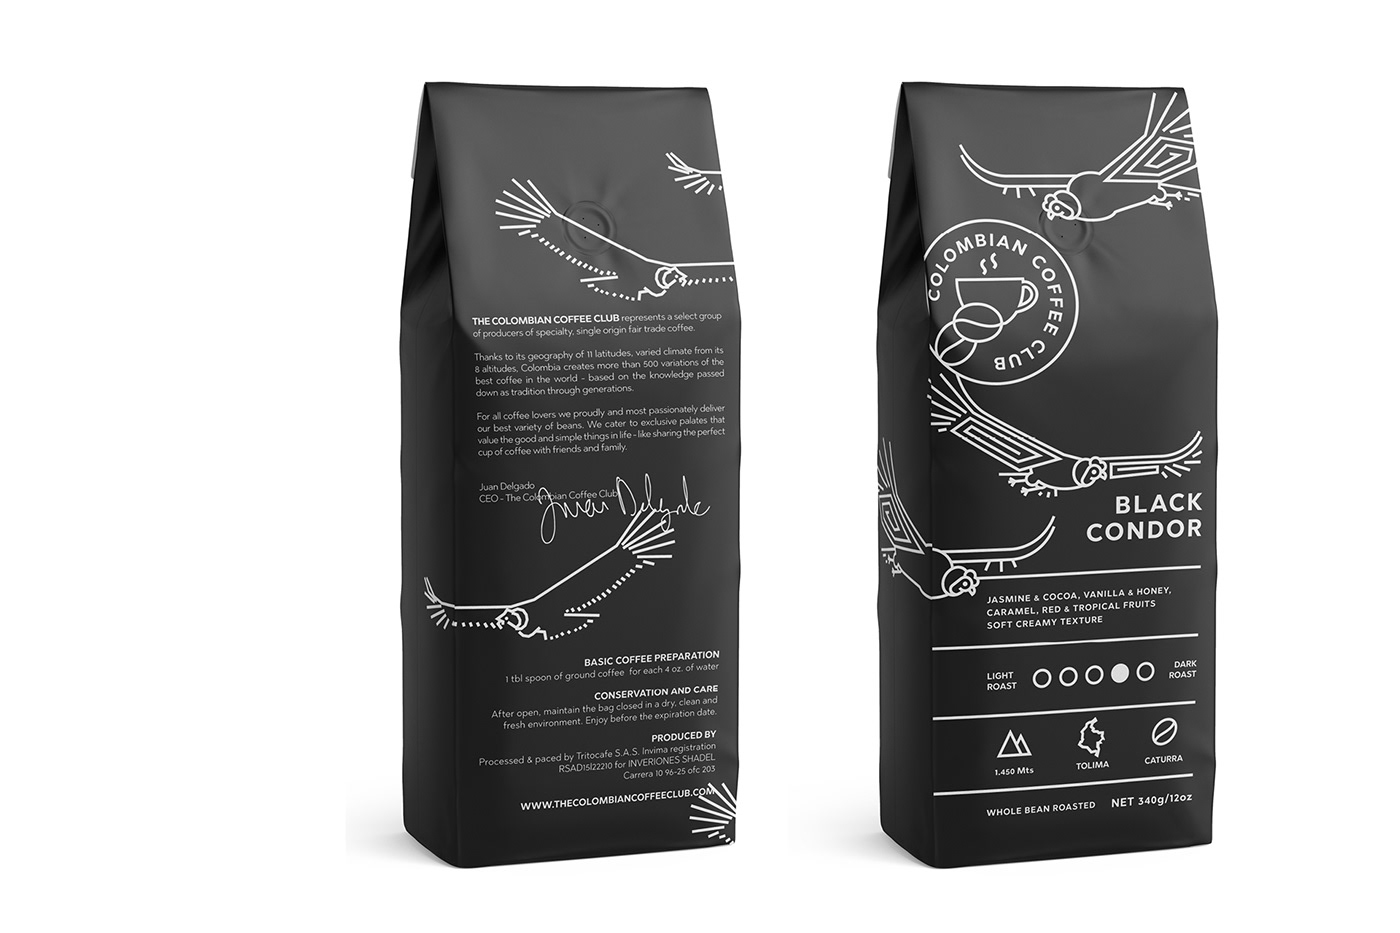 BCOME COLOMBIAN COFFEE CLUB colombia Coffee branding  logo Corporate Identity cafe re-design